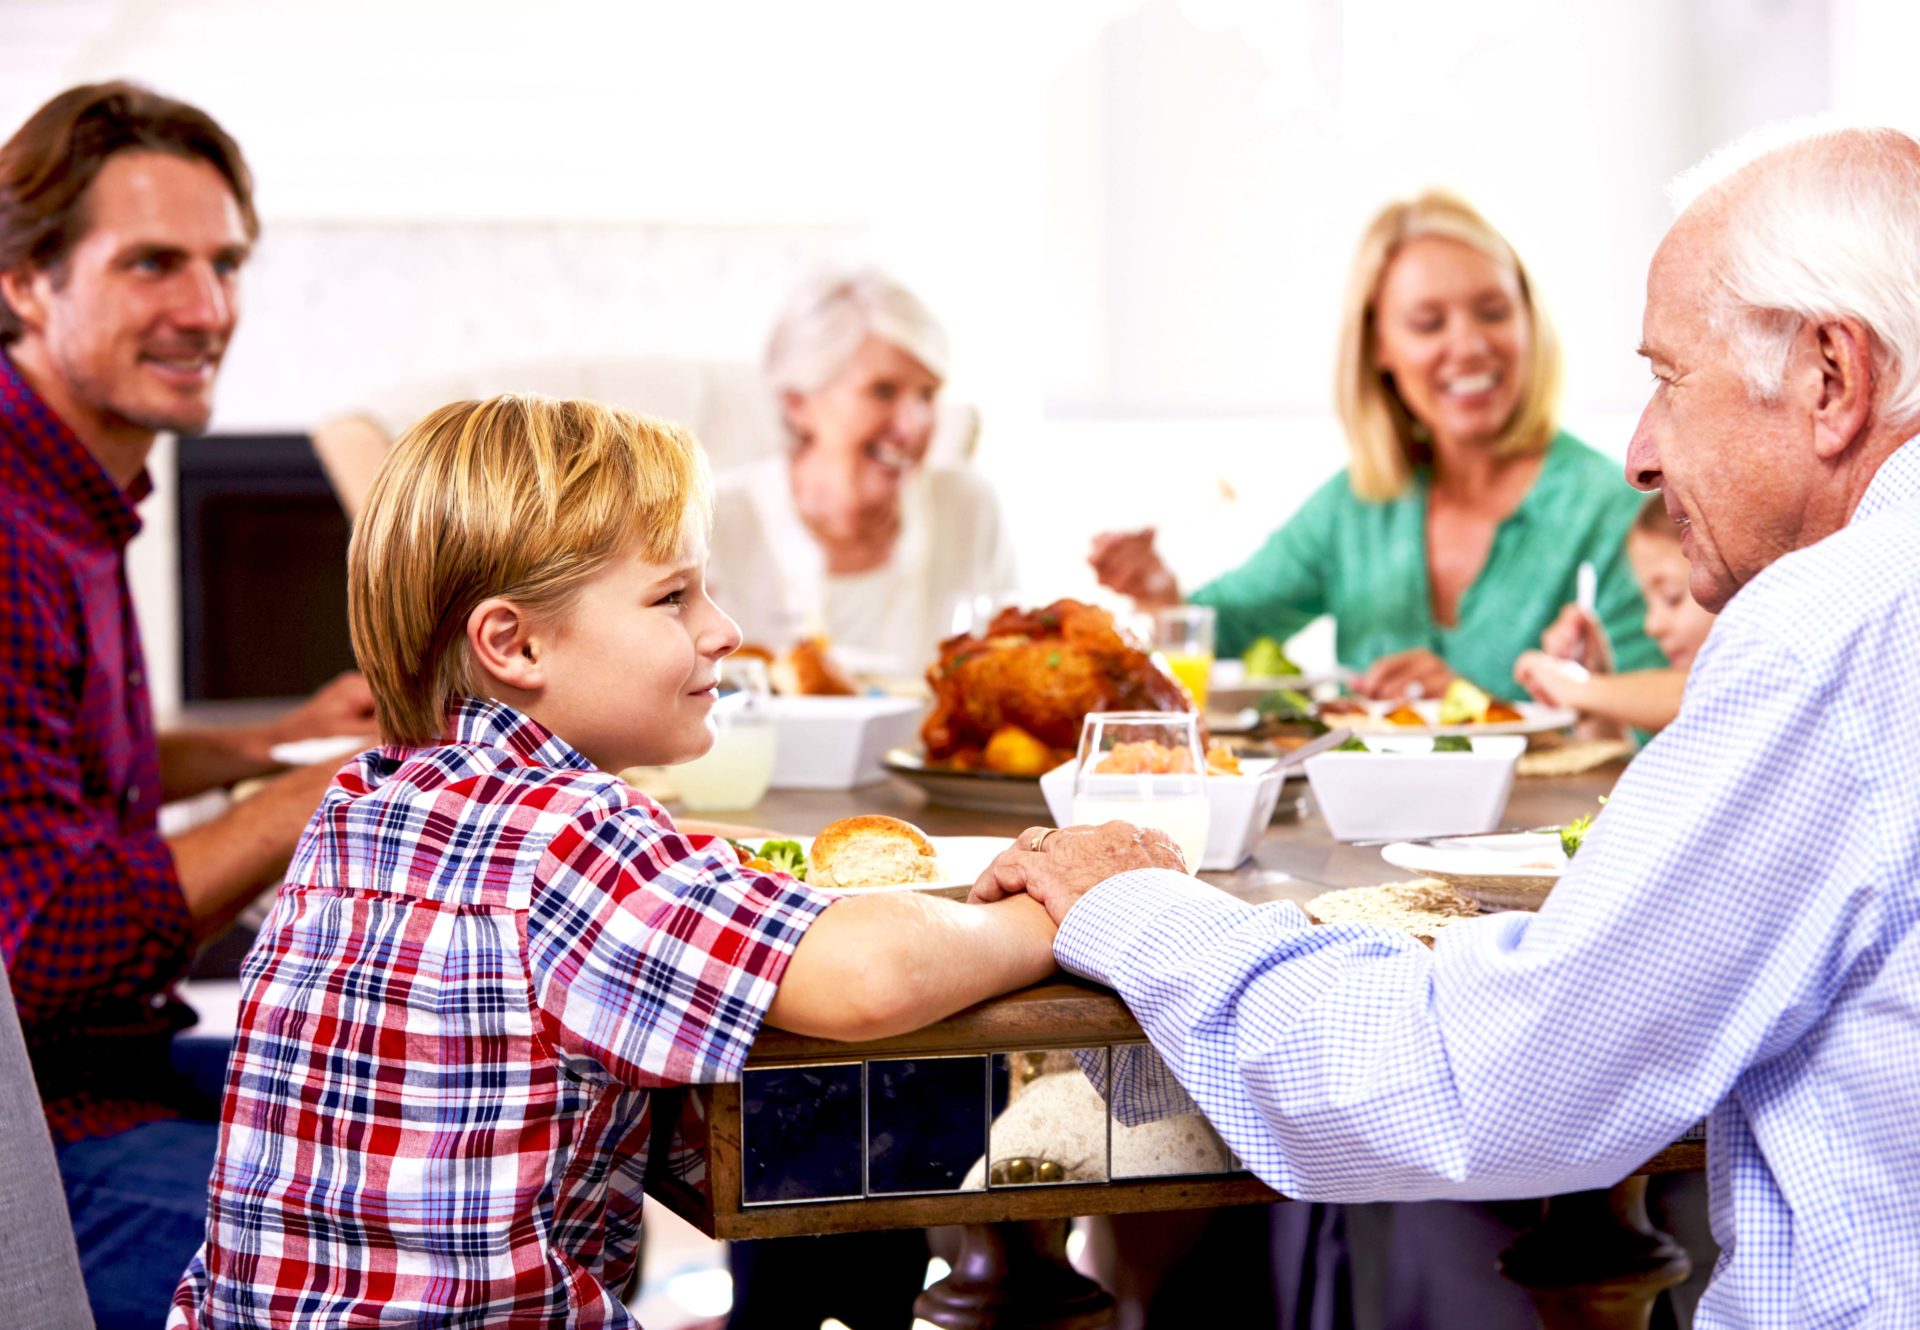 Family seated around dining room table prepared to eat a meal